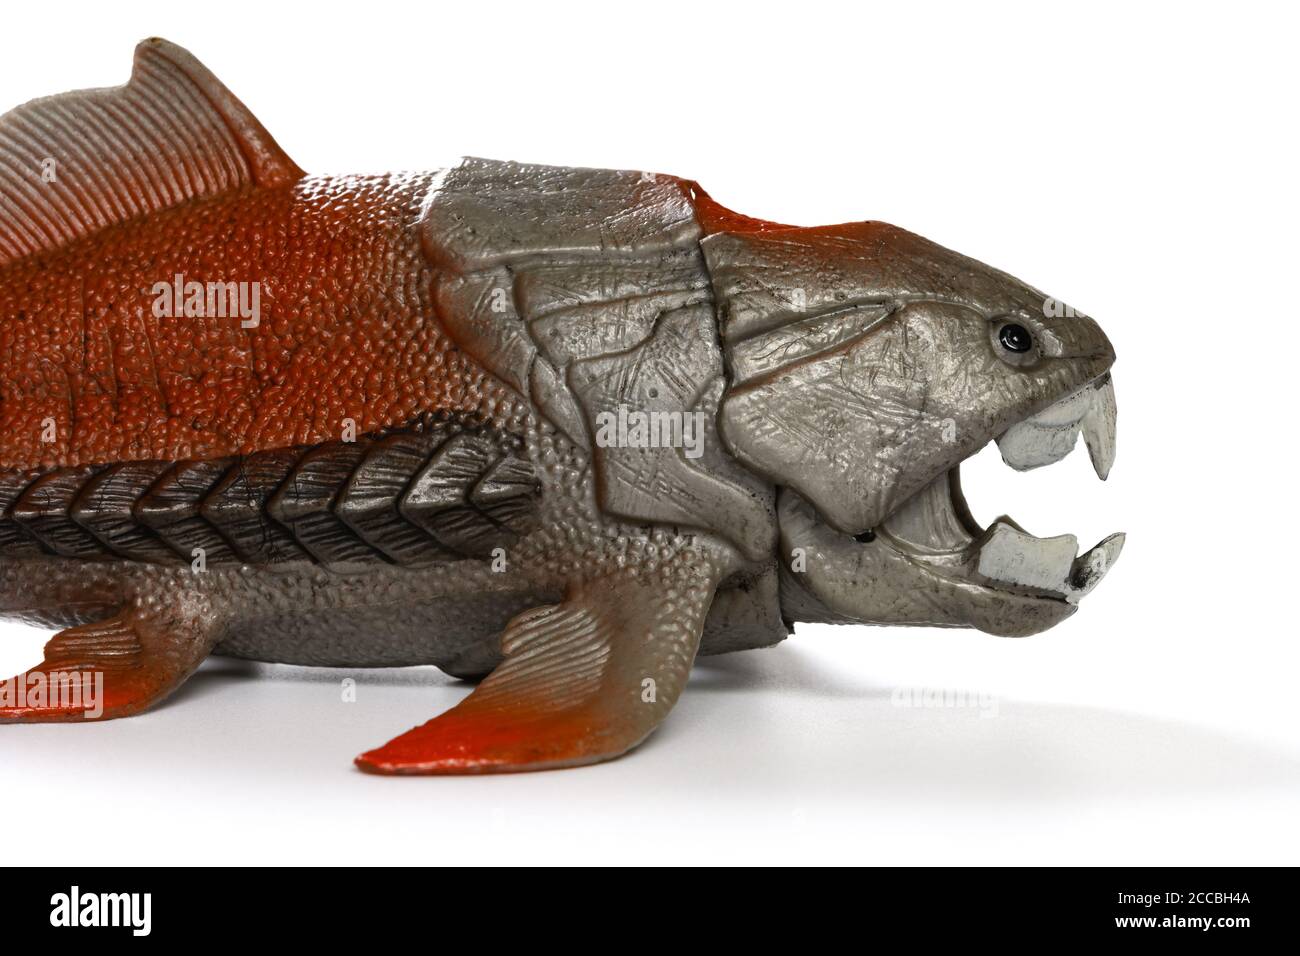 side view of Dunkleosteus terrelli model on white close up on the head Stock Photo